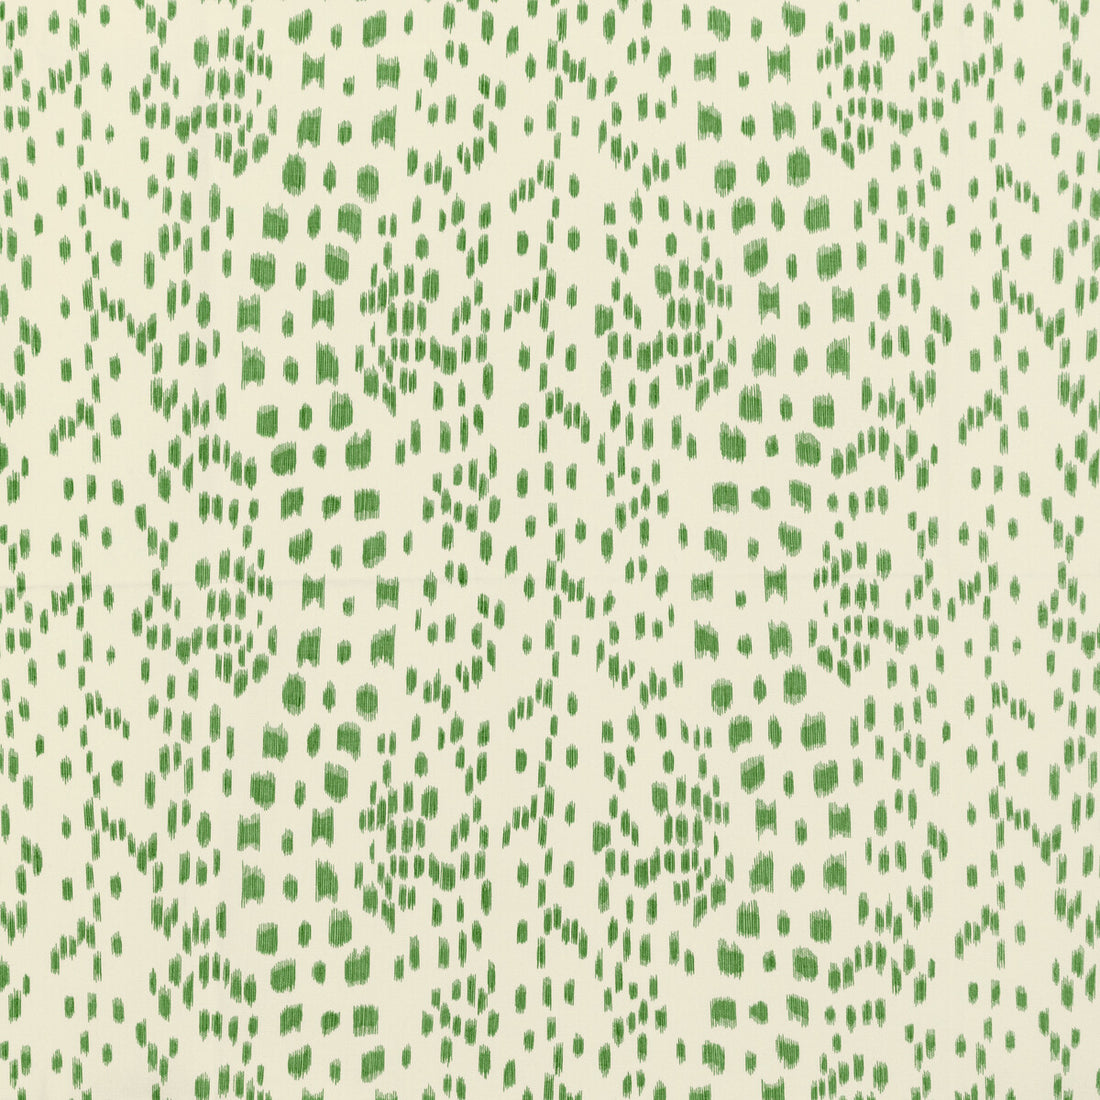 Les Touches II fabric in green color - pattern 8020131.3.0 - by Brunschwig &amp; Fils in the En Vacances II collection